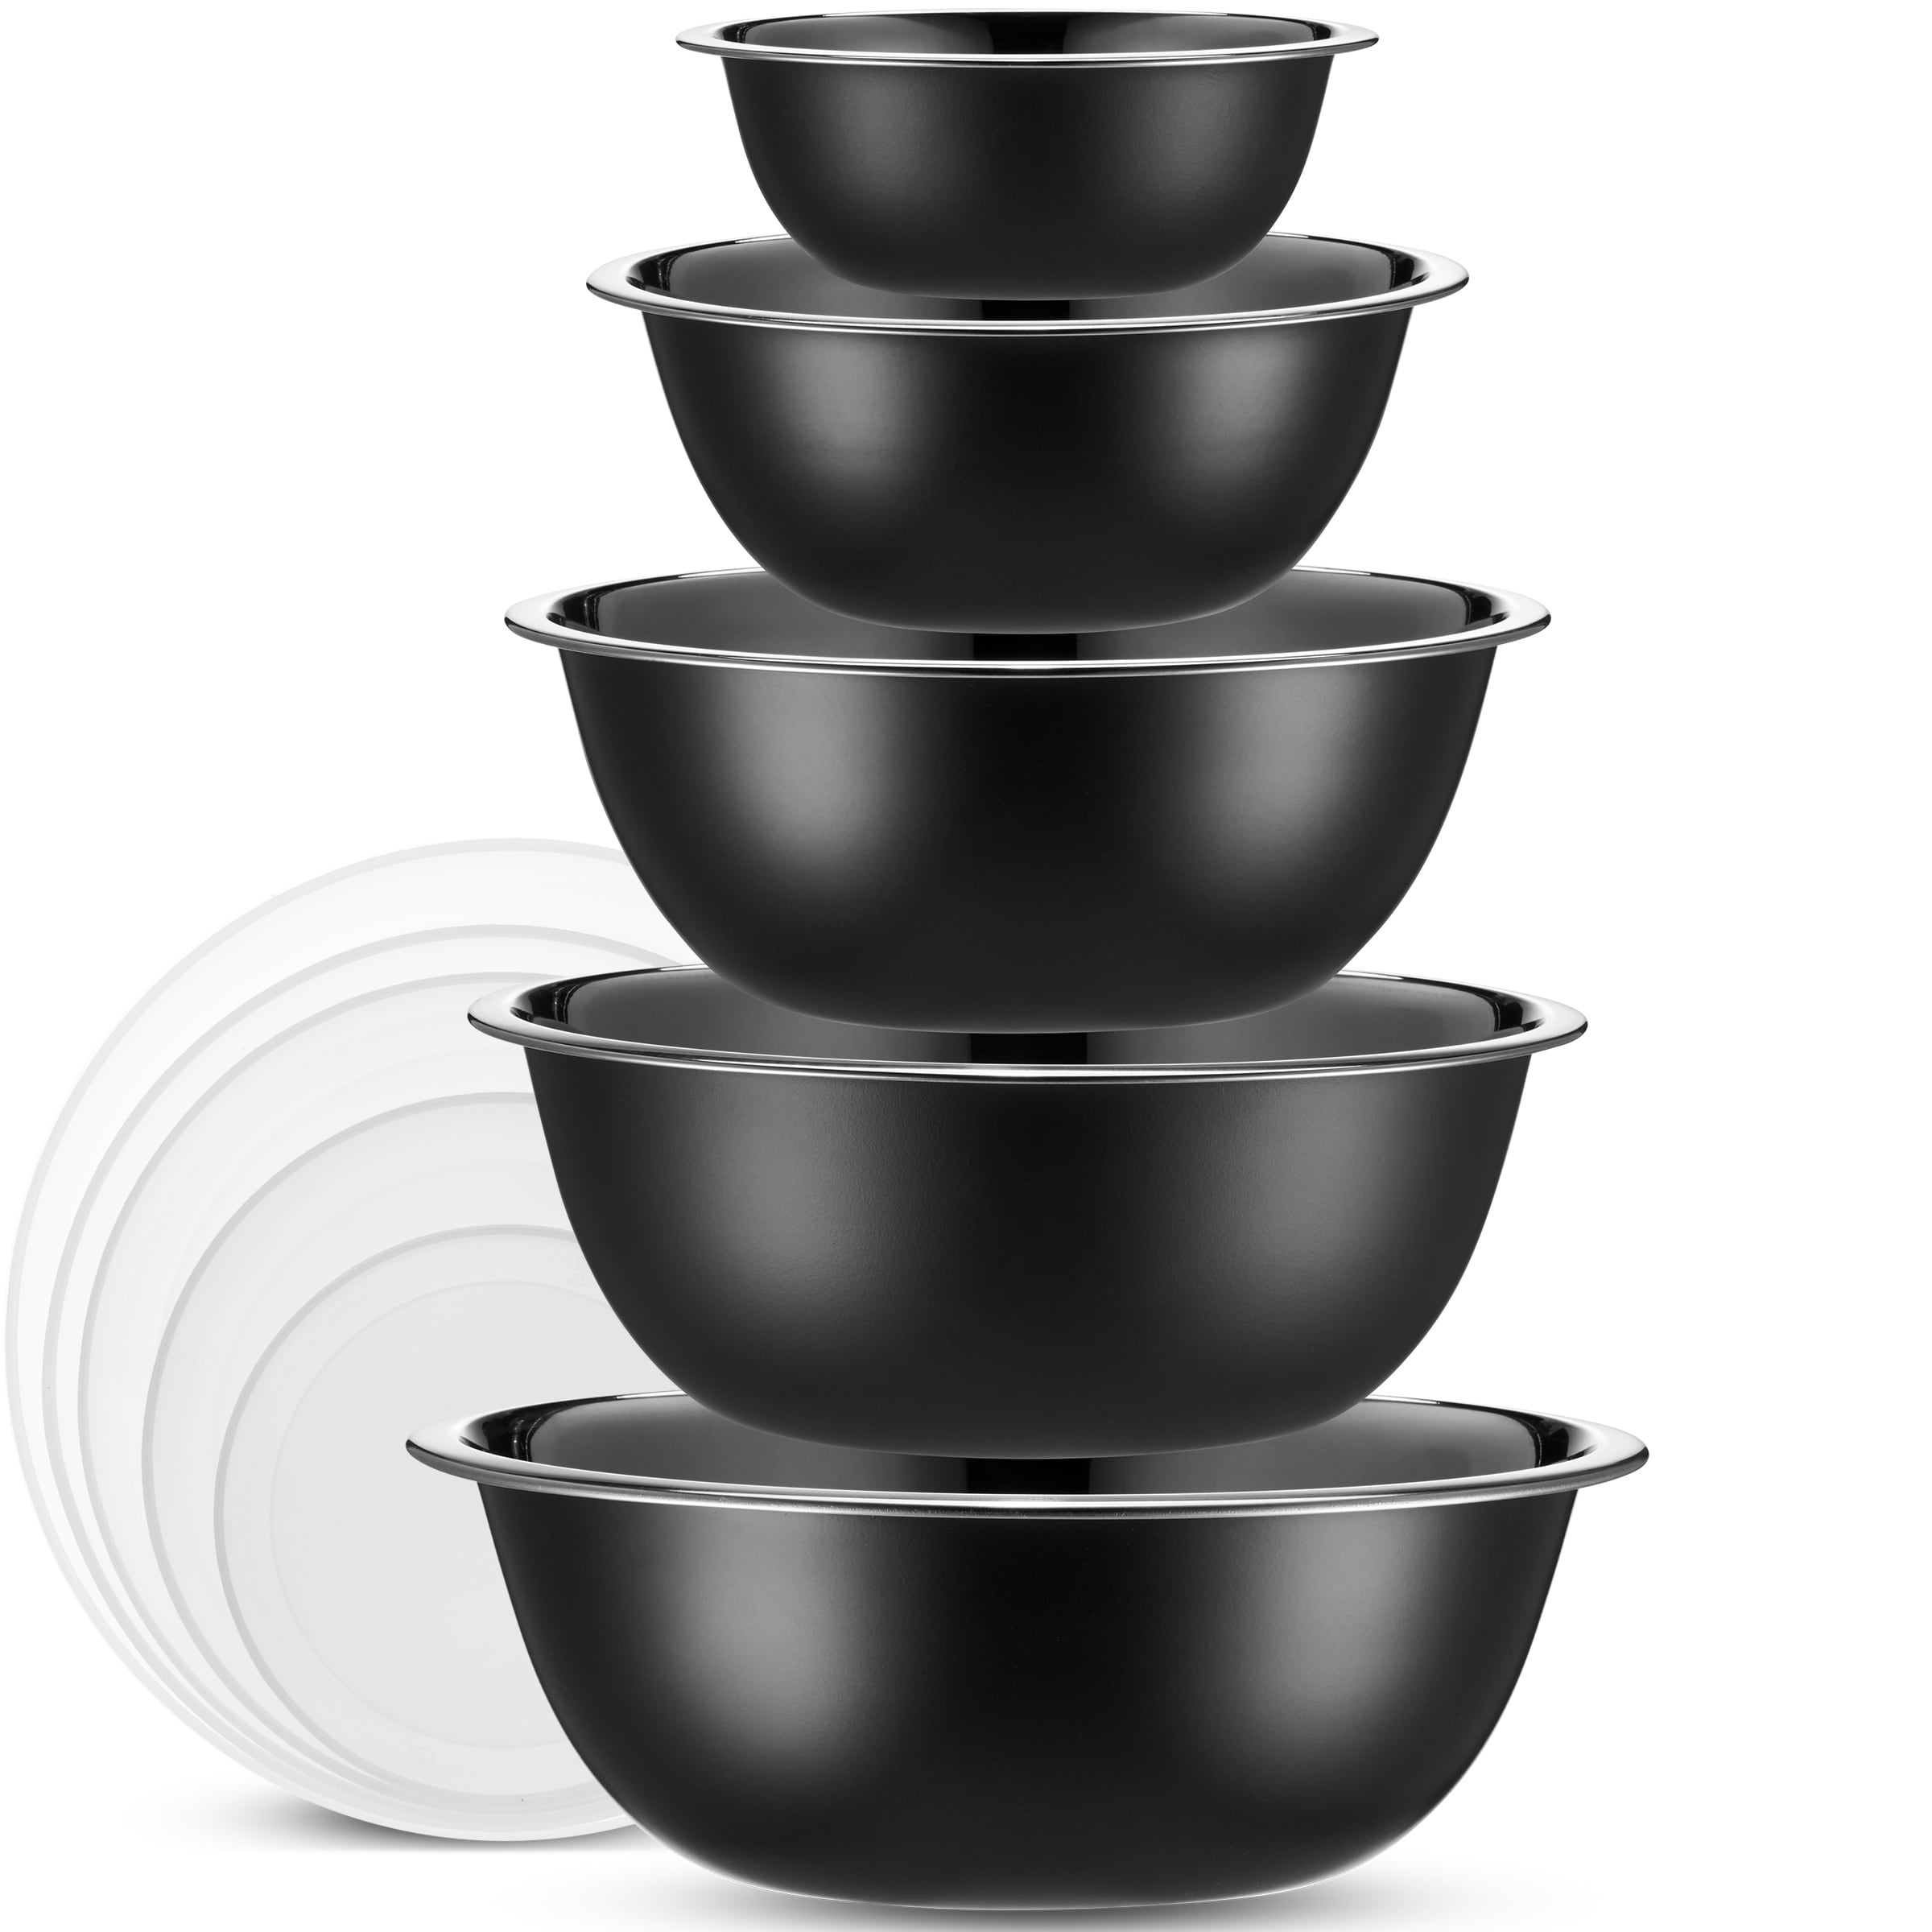 https://ak1.ostkcdn.com/images/products/is/images/direct/dabddef73225f46048c9101f4826471756d464c1/Heavy-Duty-Meal-Prep-Stainless-Steel-Mixing-Bowls-Set-with-Lids.jpg